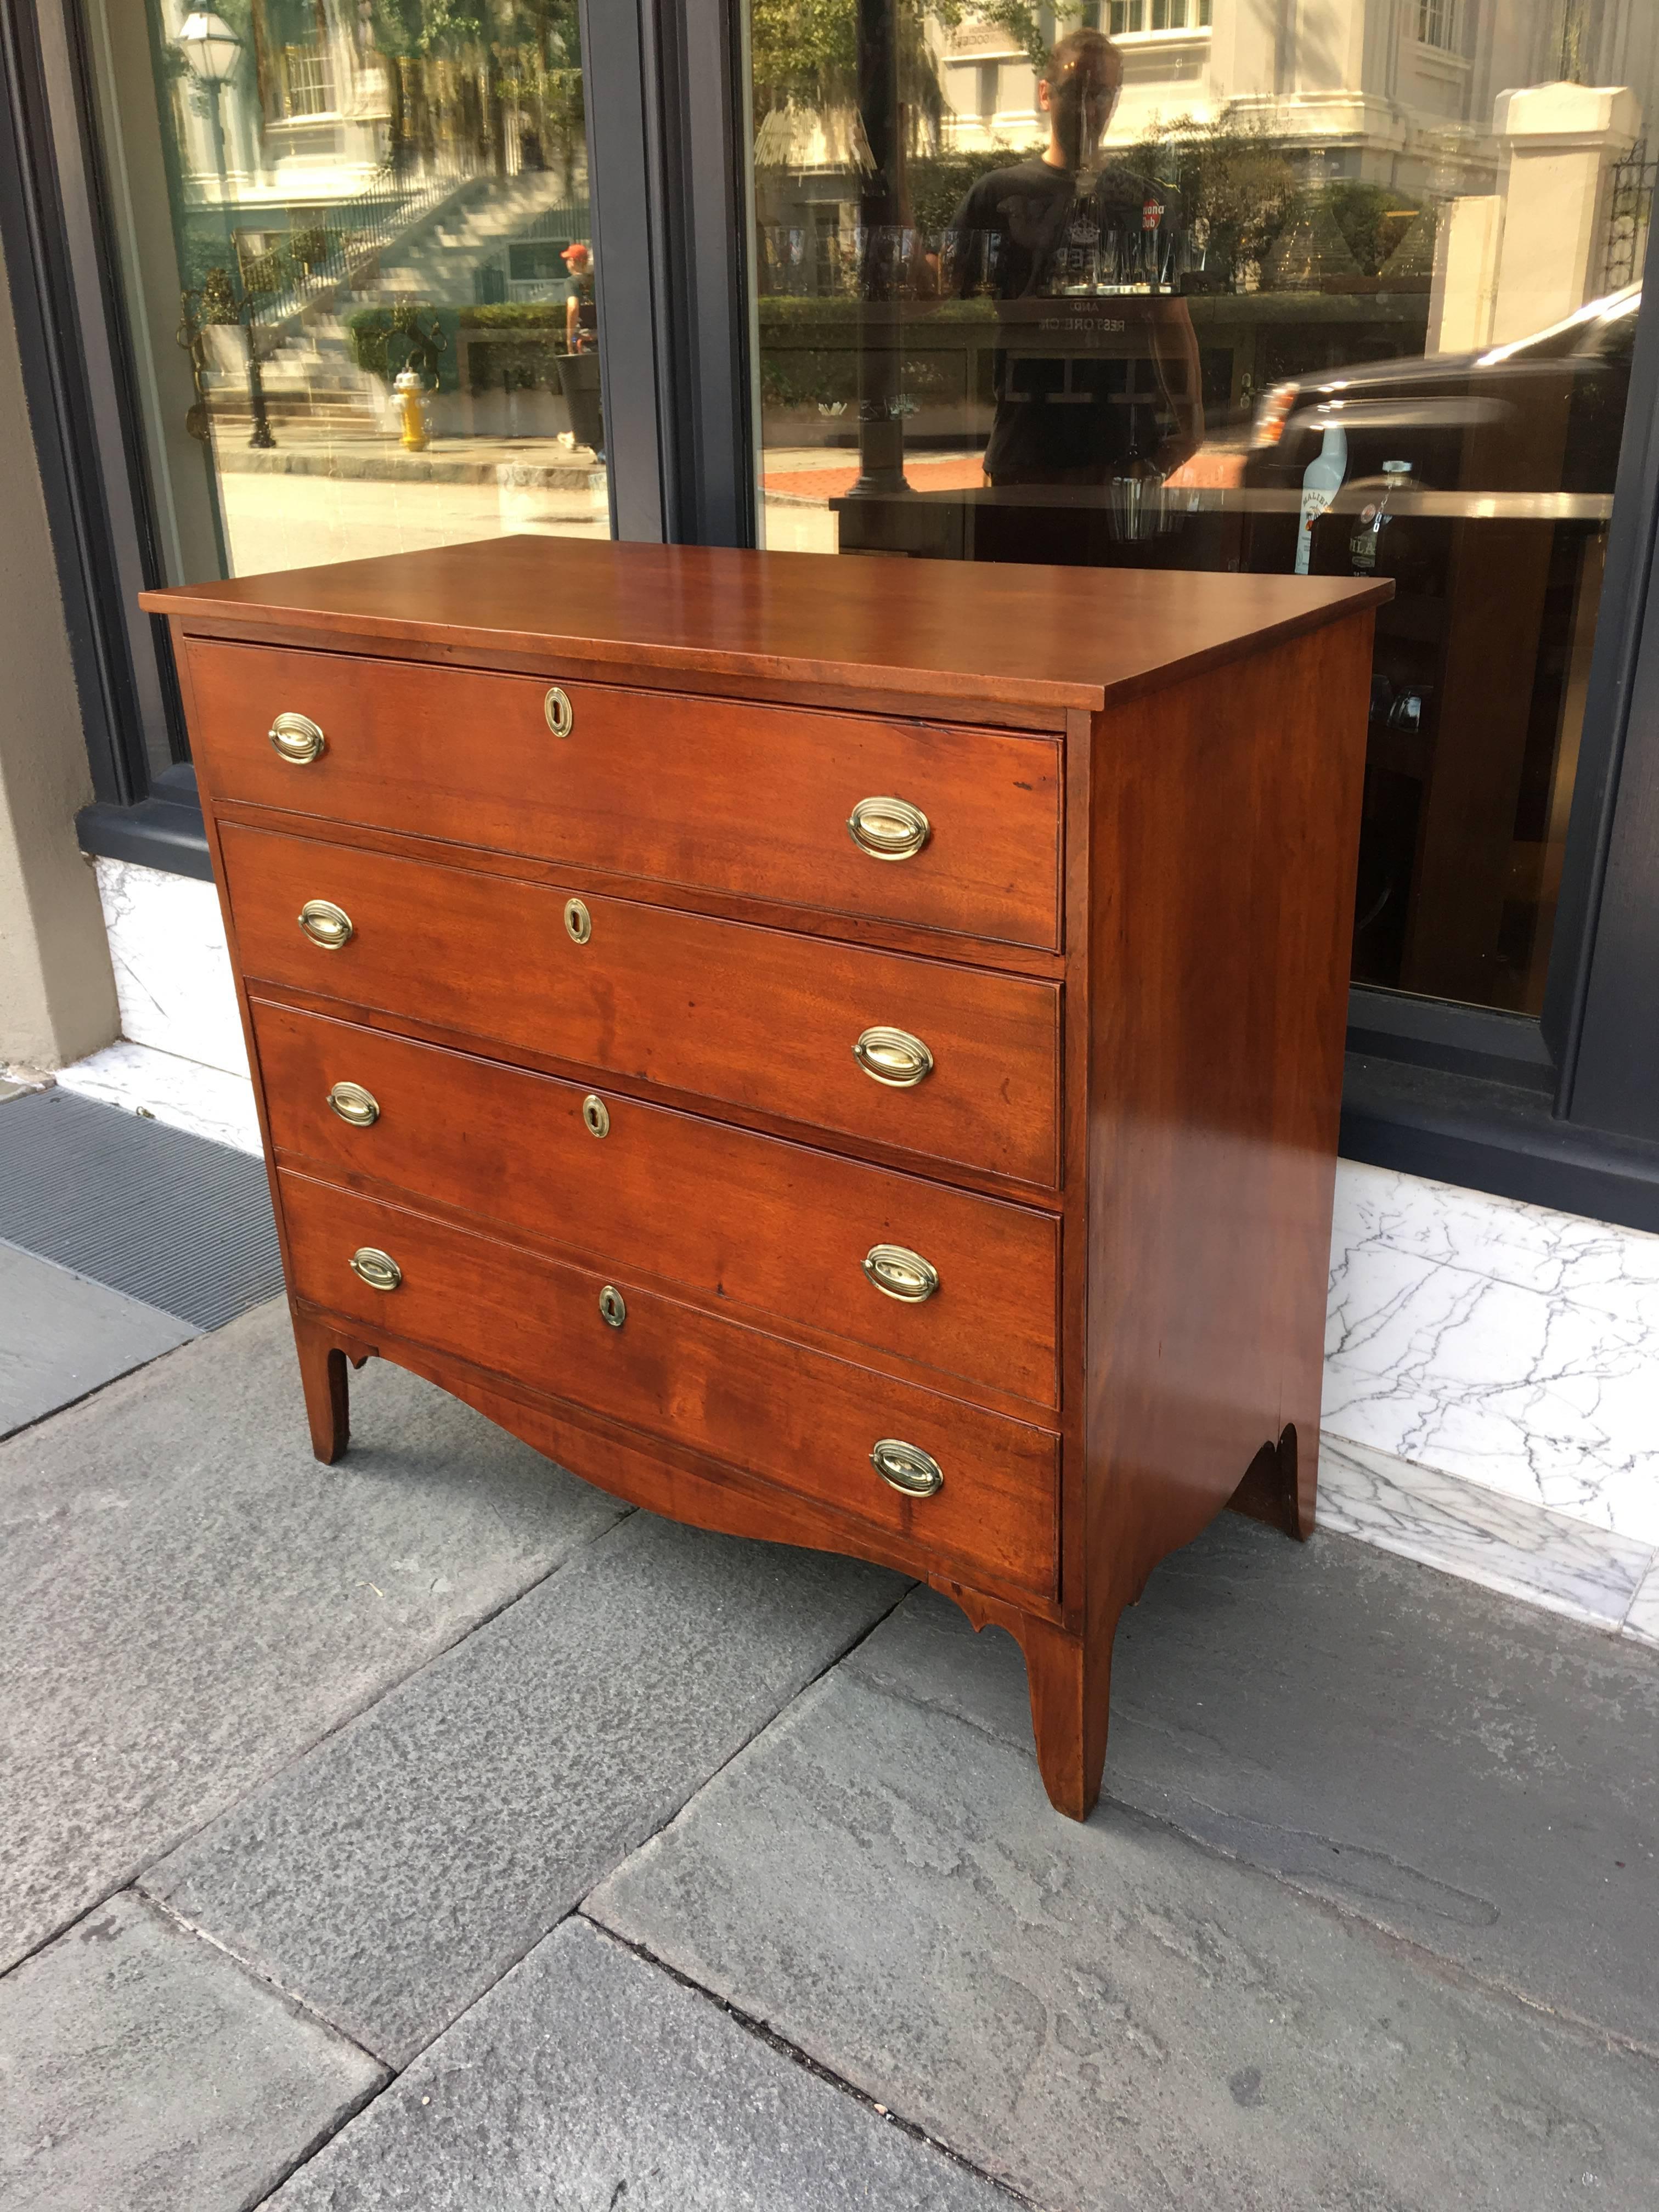 North American American Birch New England Chest Late 19th Century with Original Pulls